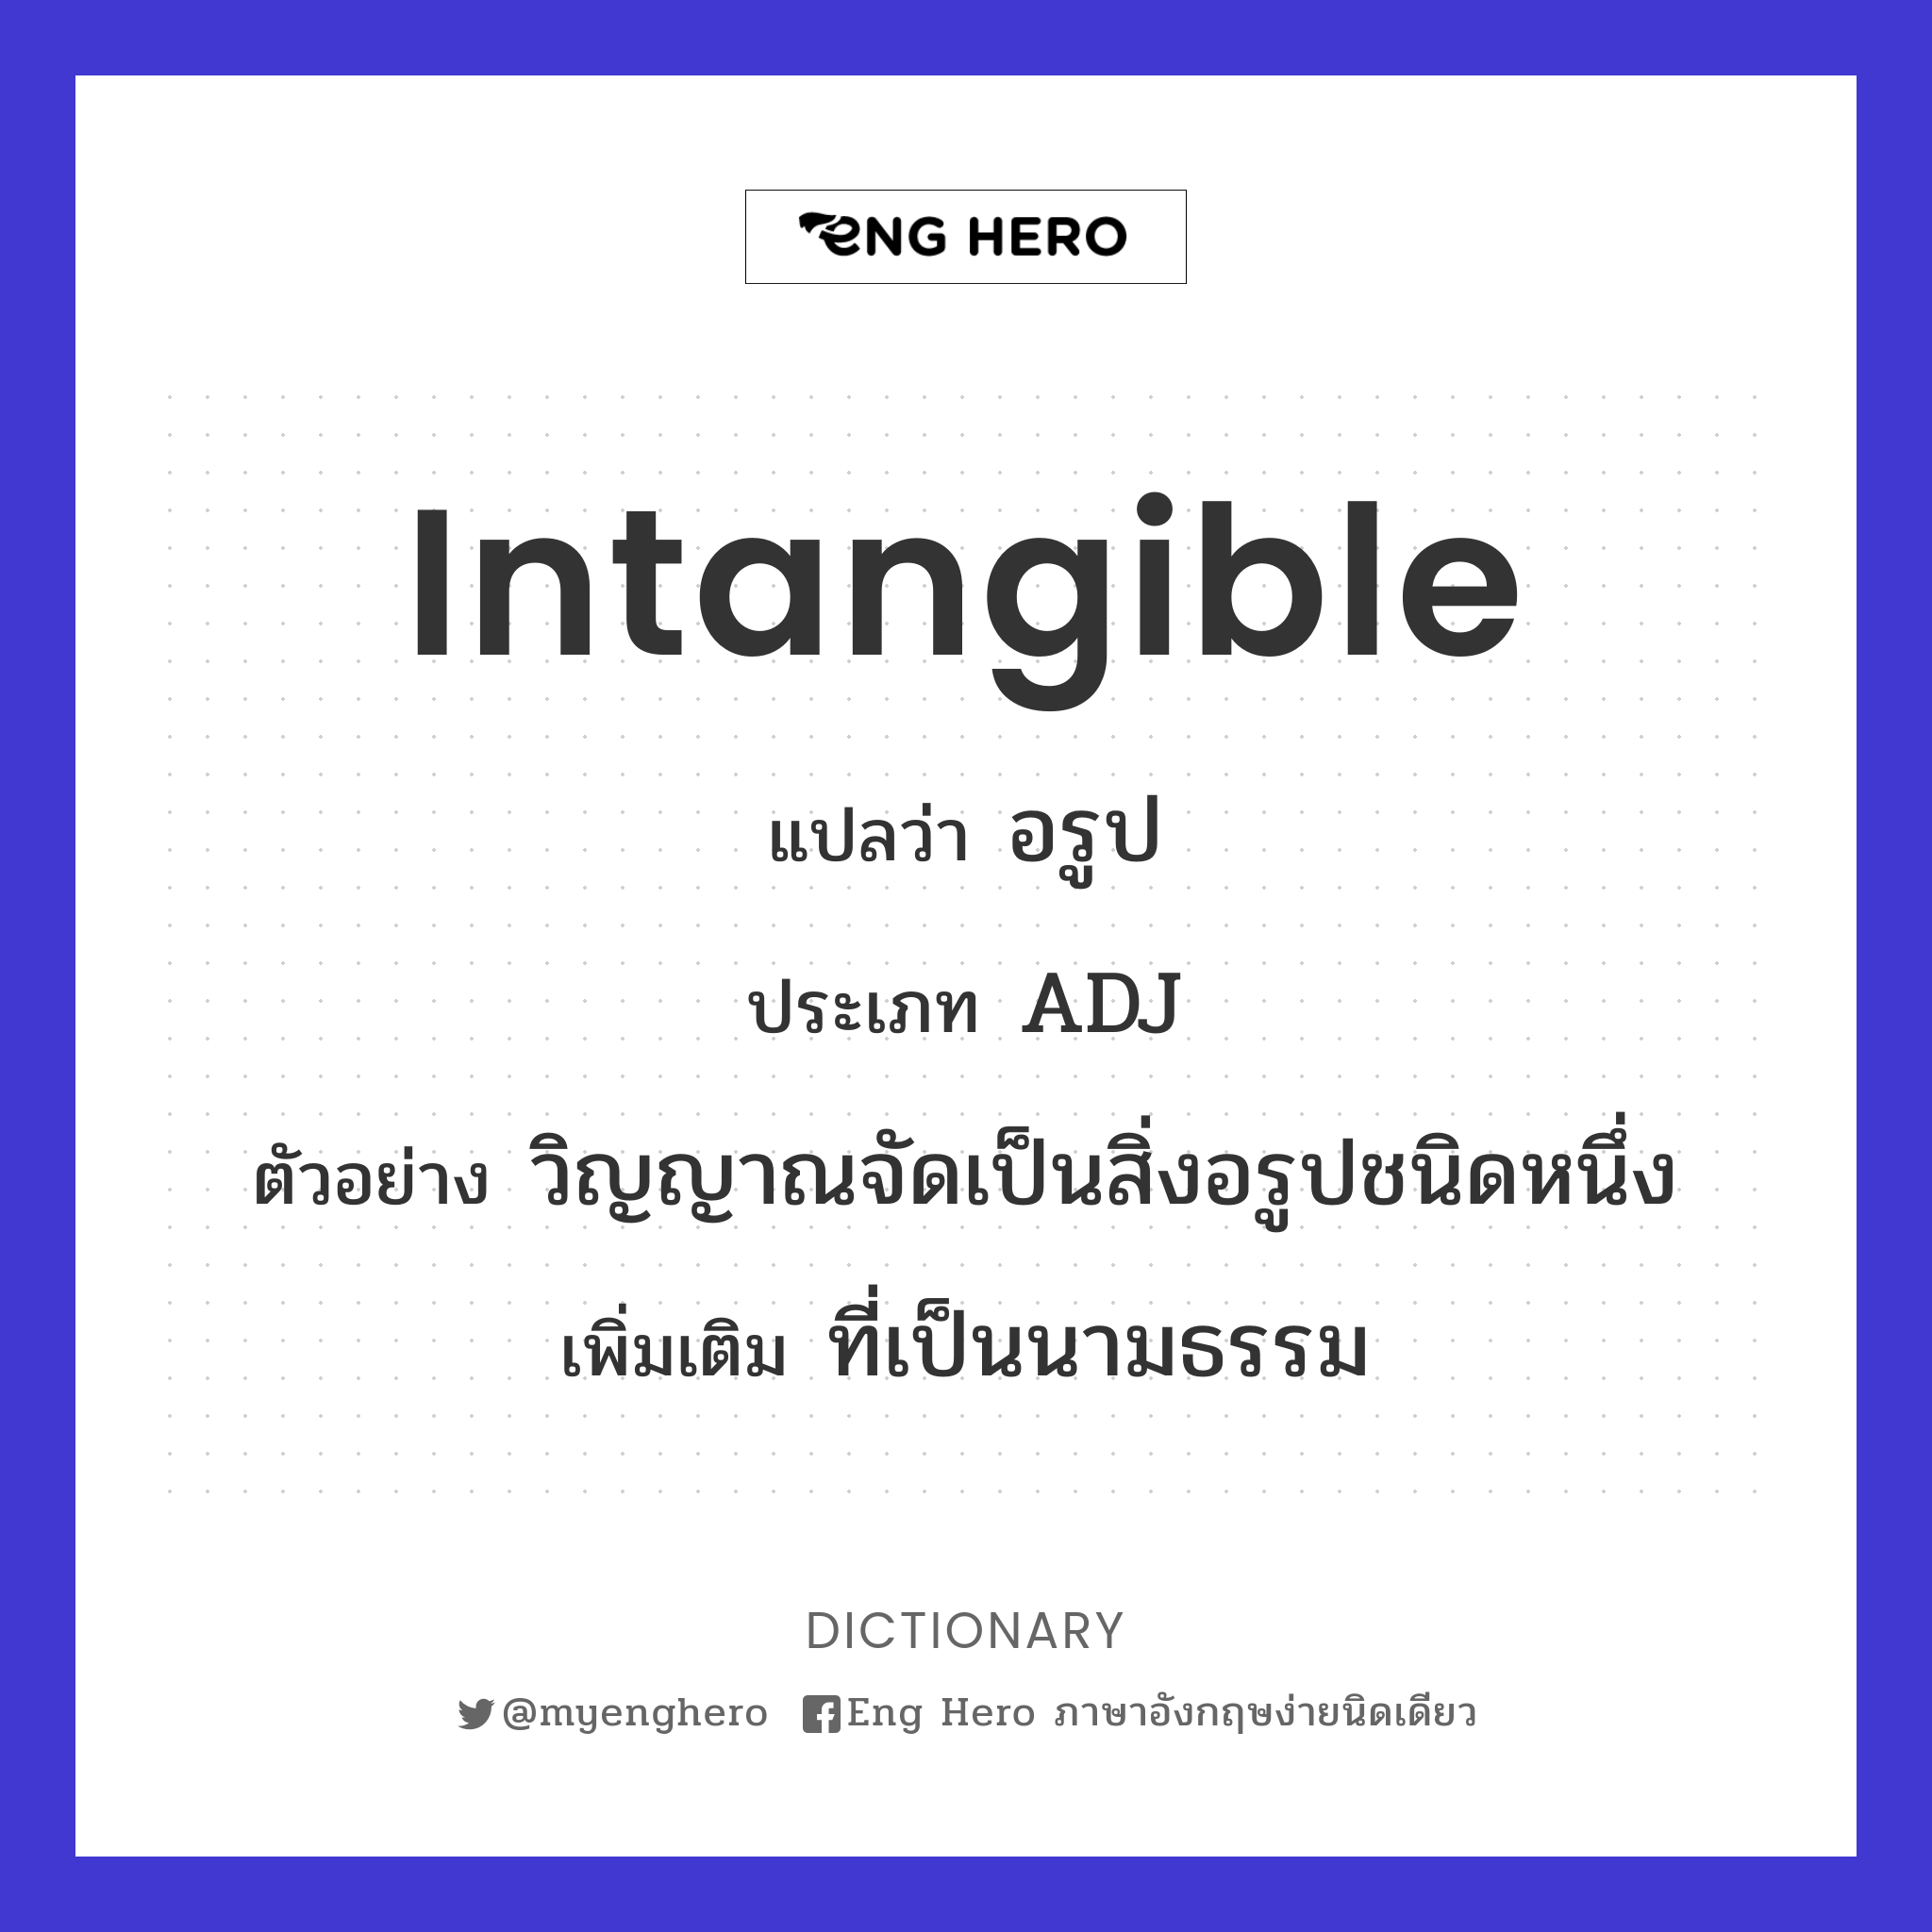 intangible